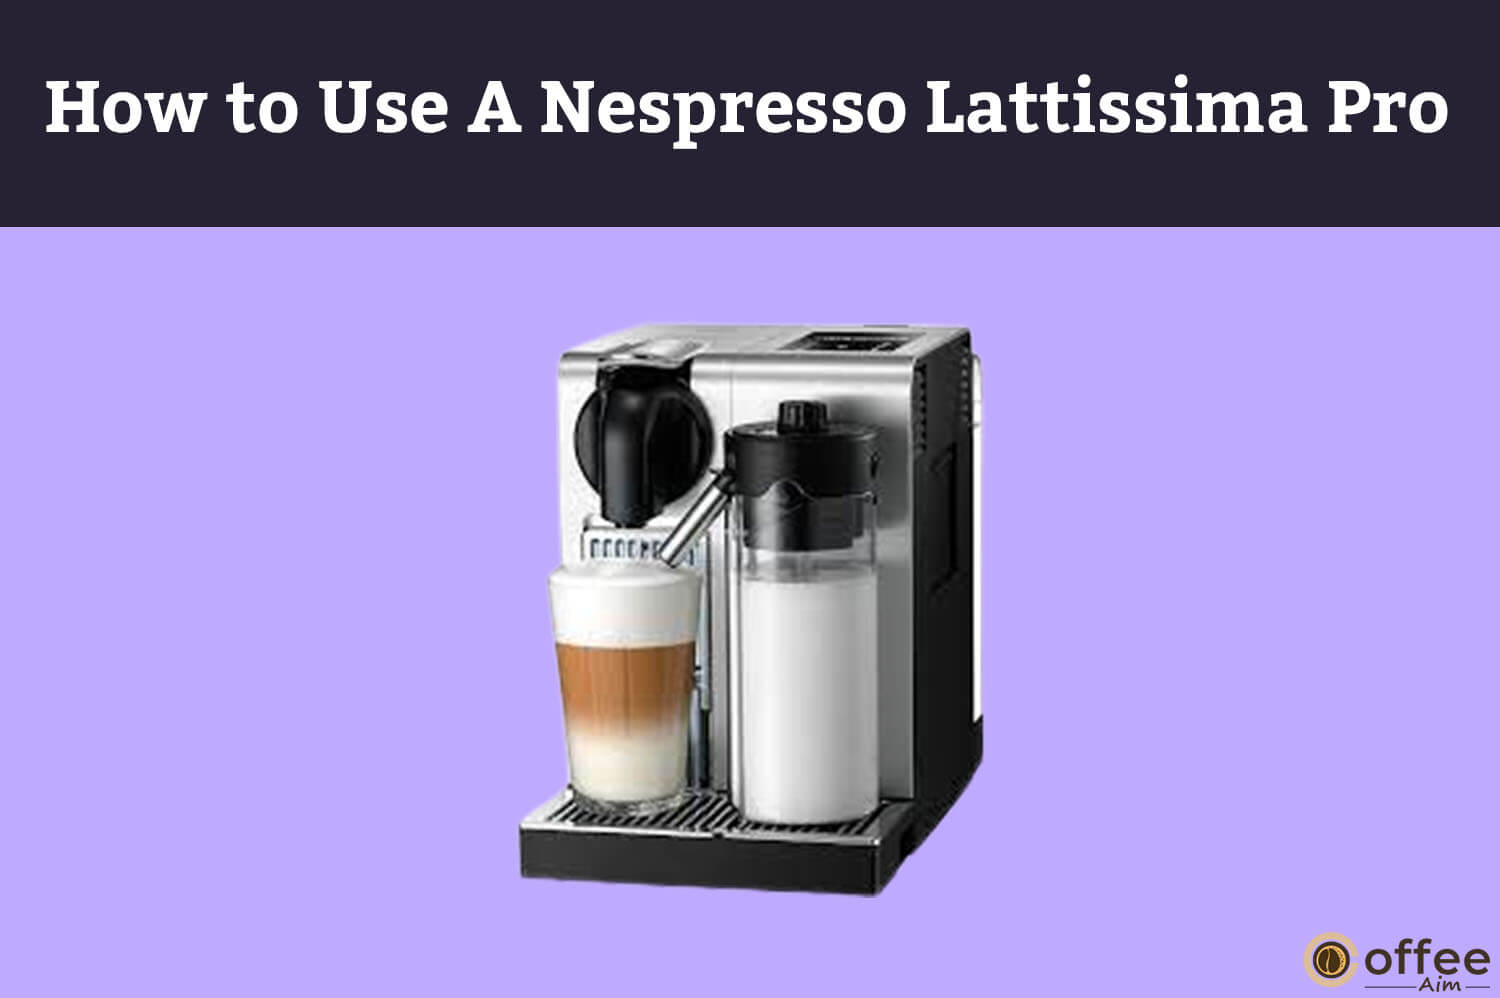 Featured image for the article "How to Use A Nespresso Lattissima Pro"